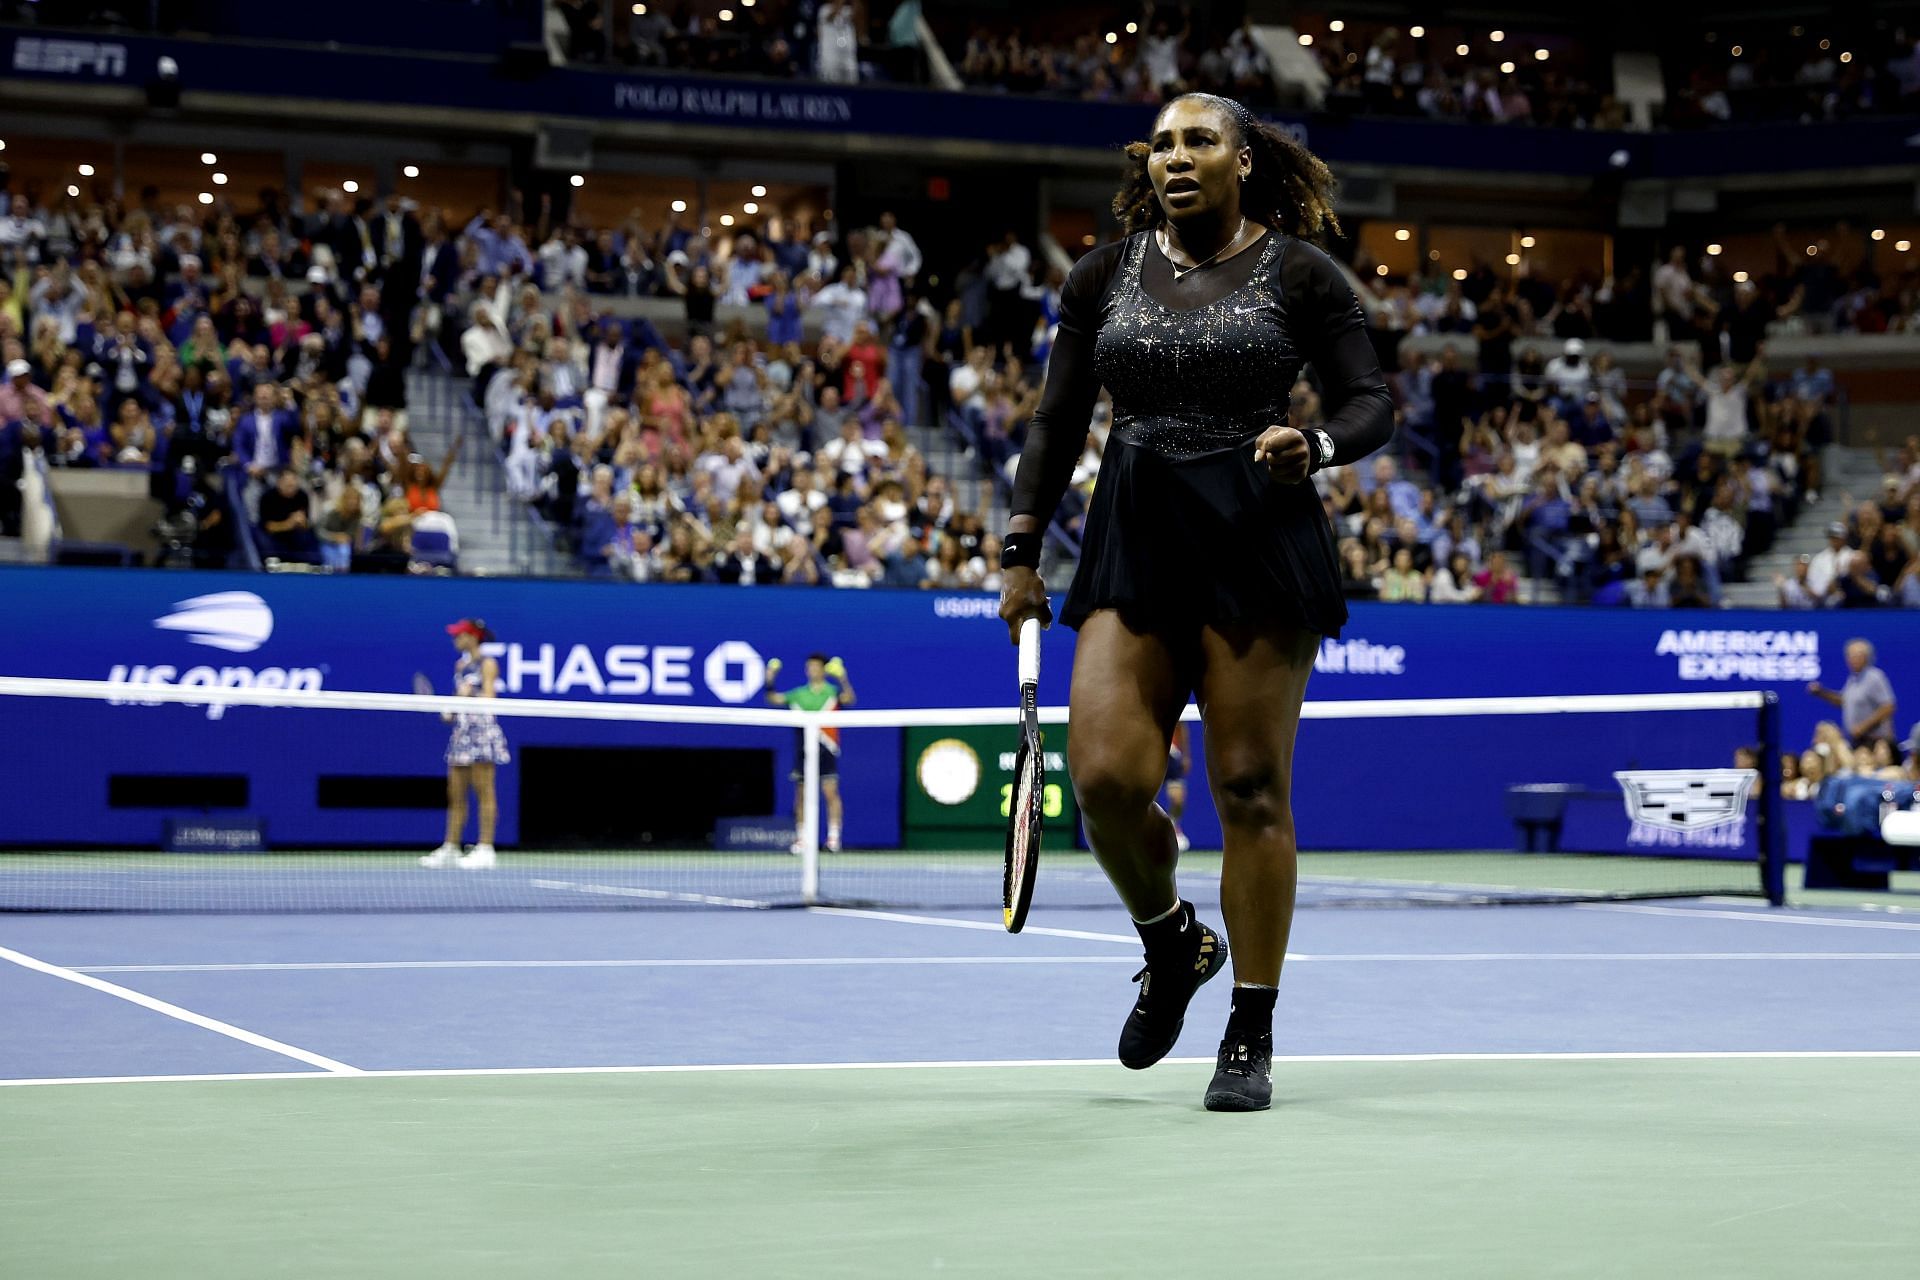 Serena Williams in action at the 2022 US Open. Photo by Sarah Stier/Getty Images